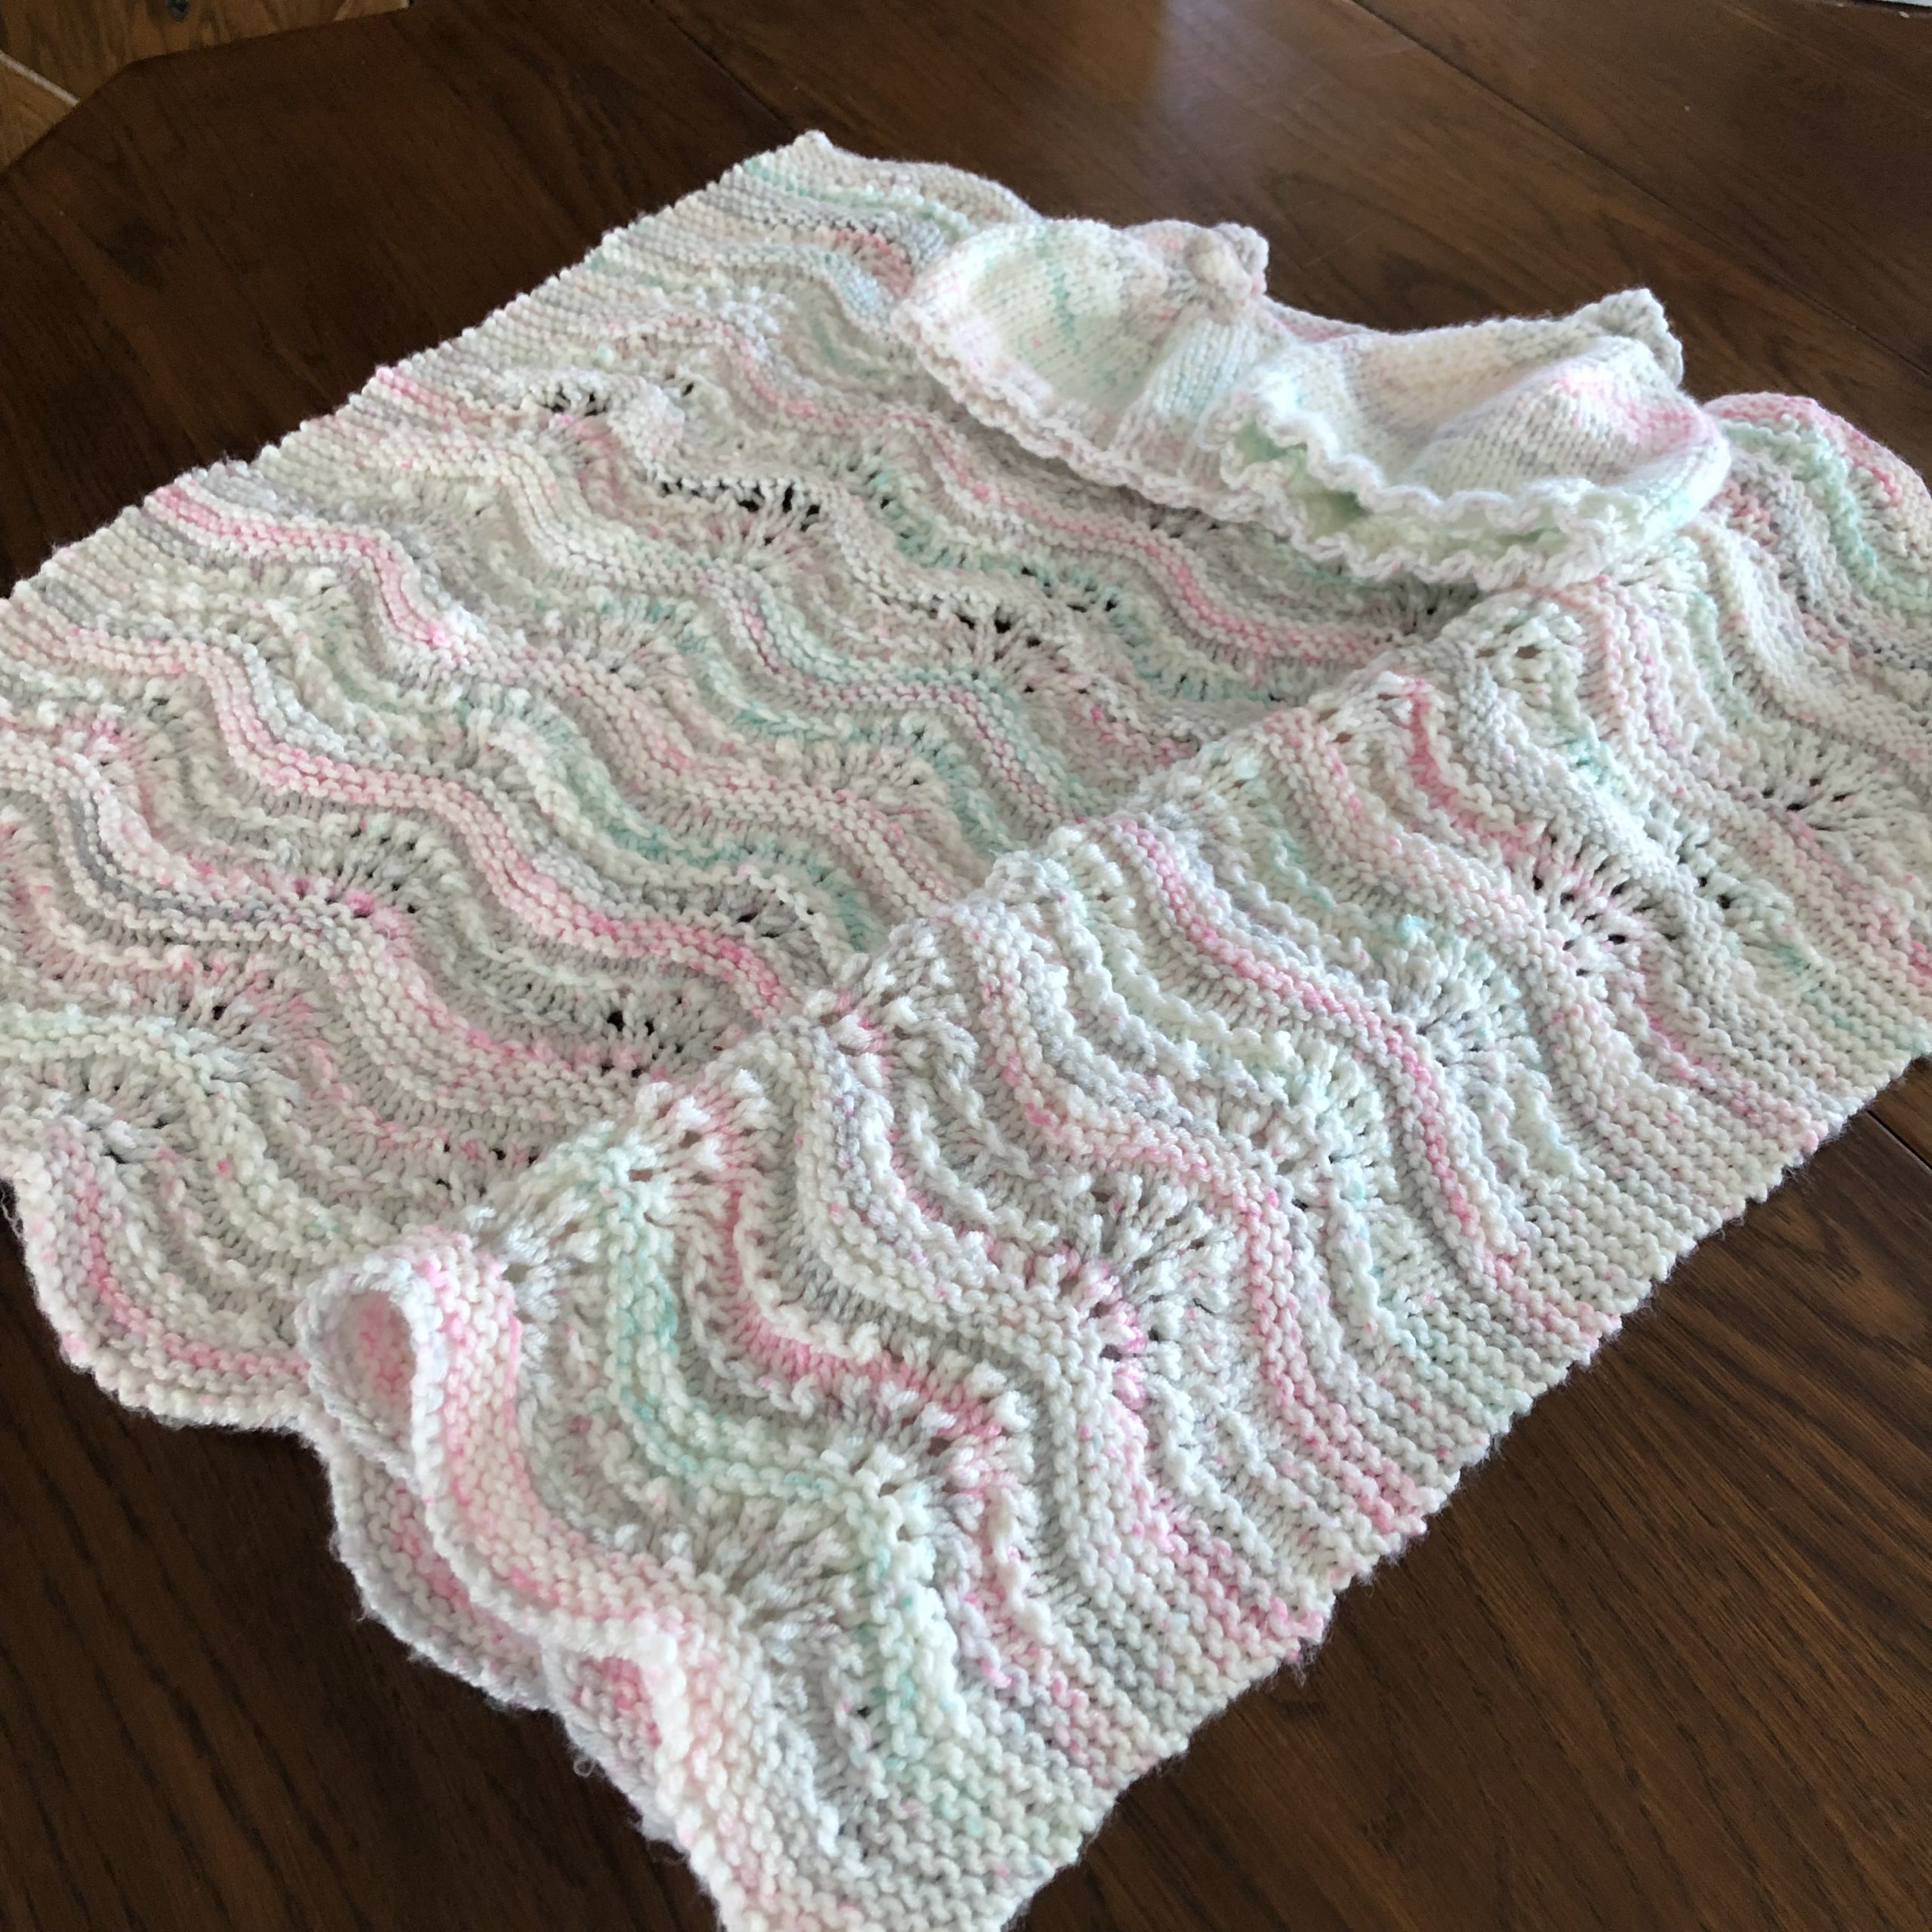 Kay-knit blanket and hats 2021